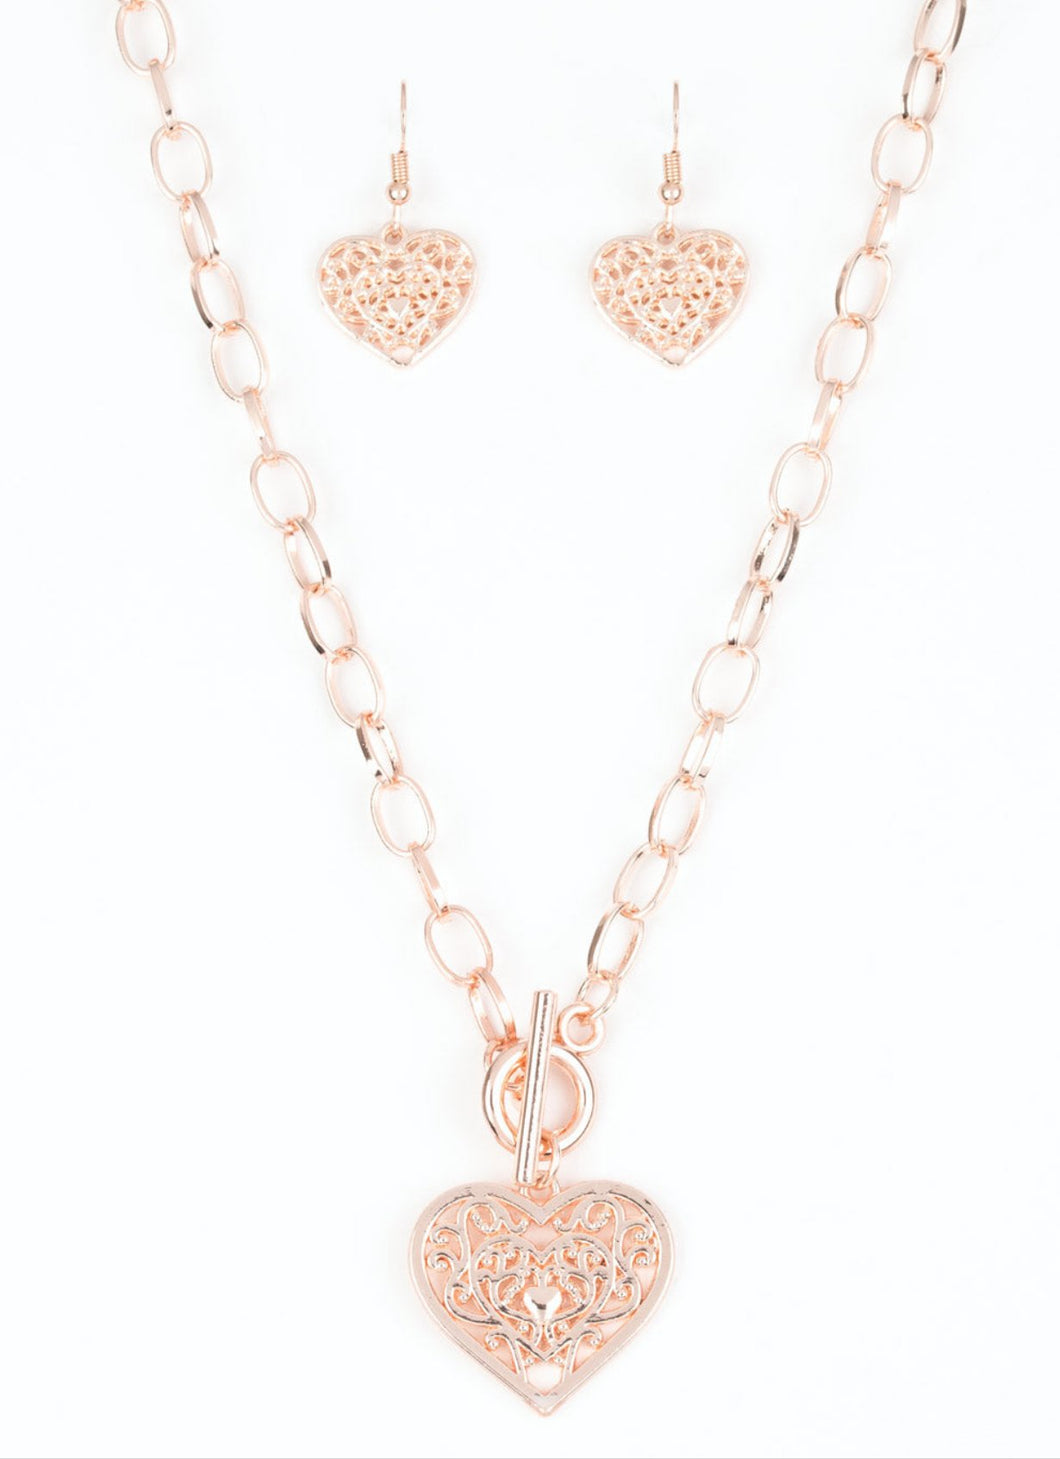 Victorian Romance Rose Gold Necklace and Earrings